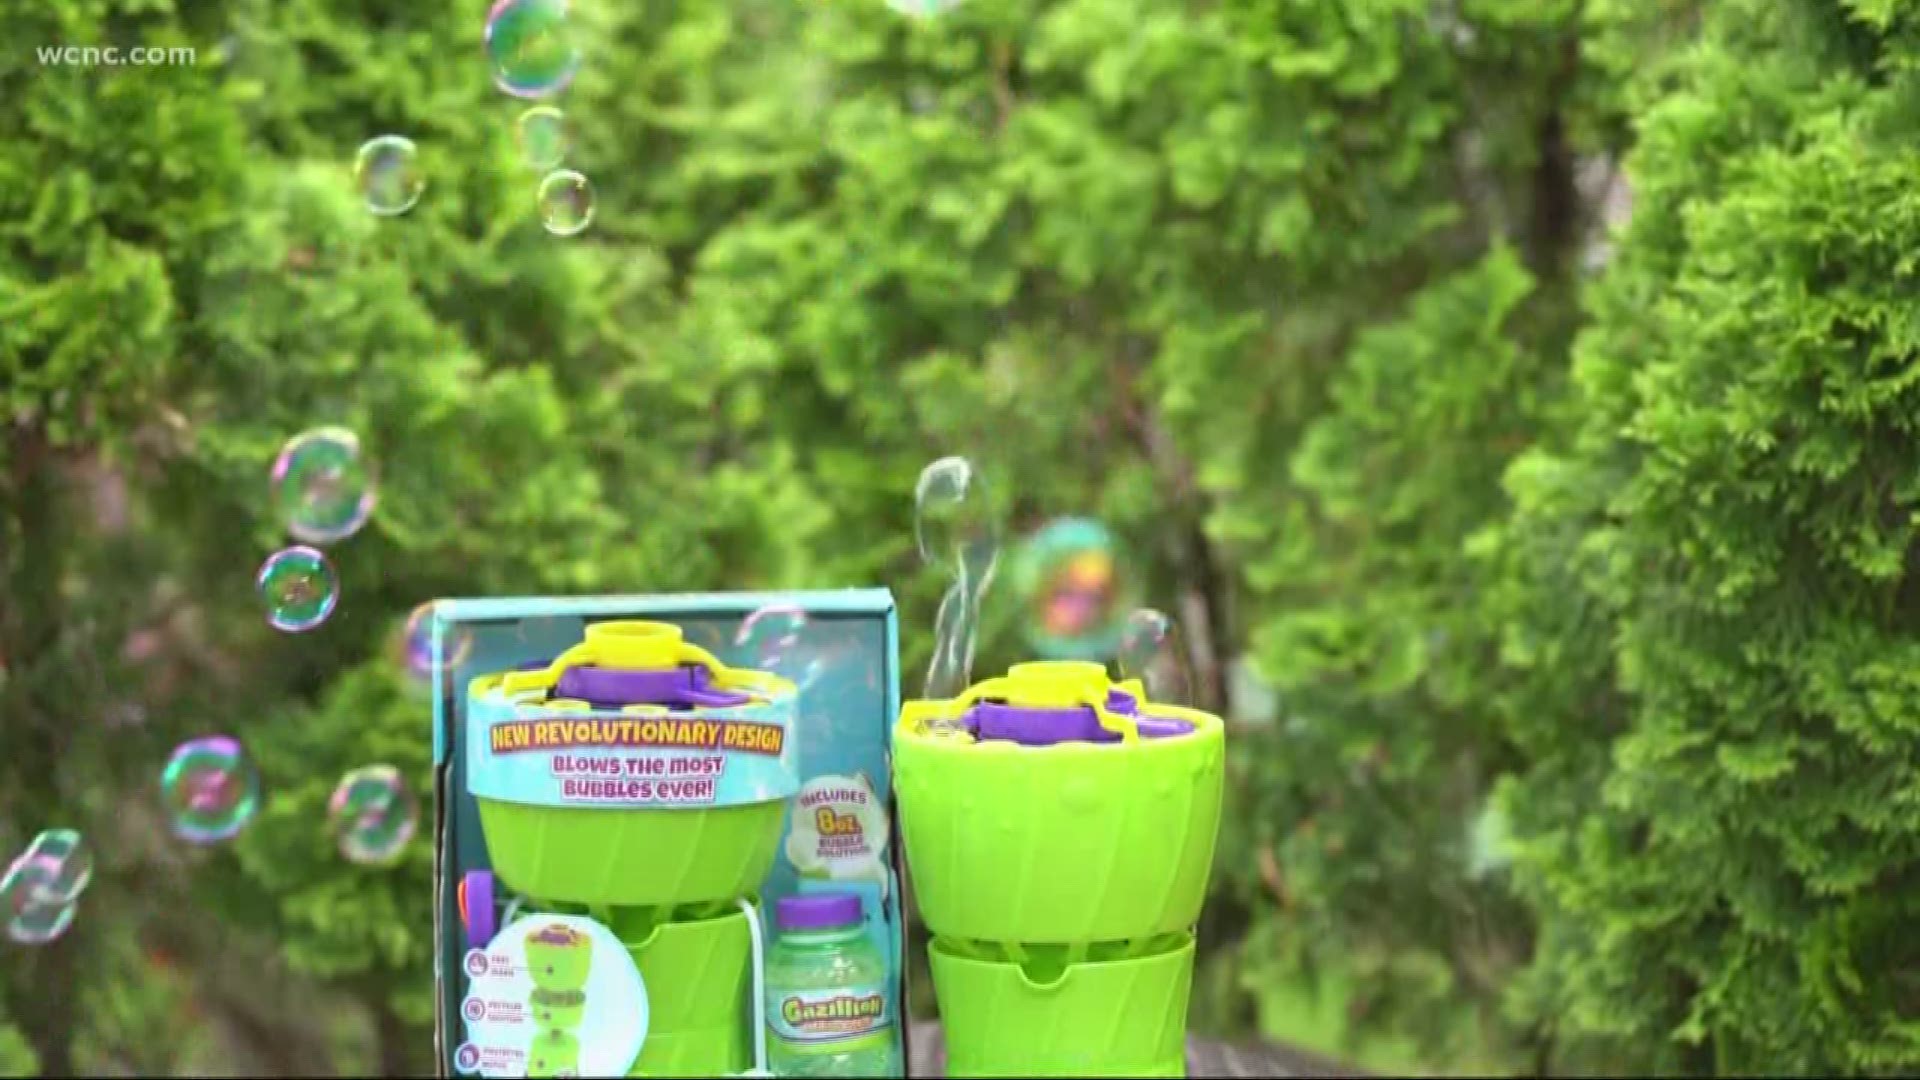 Lifestyle expert, Limor Suss, shares three products that will make your summer more fun.